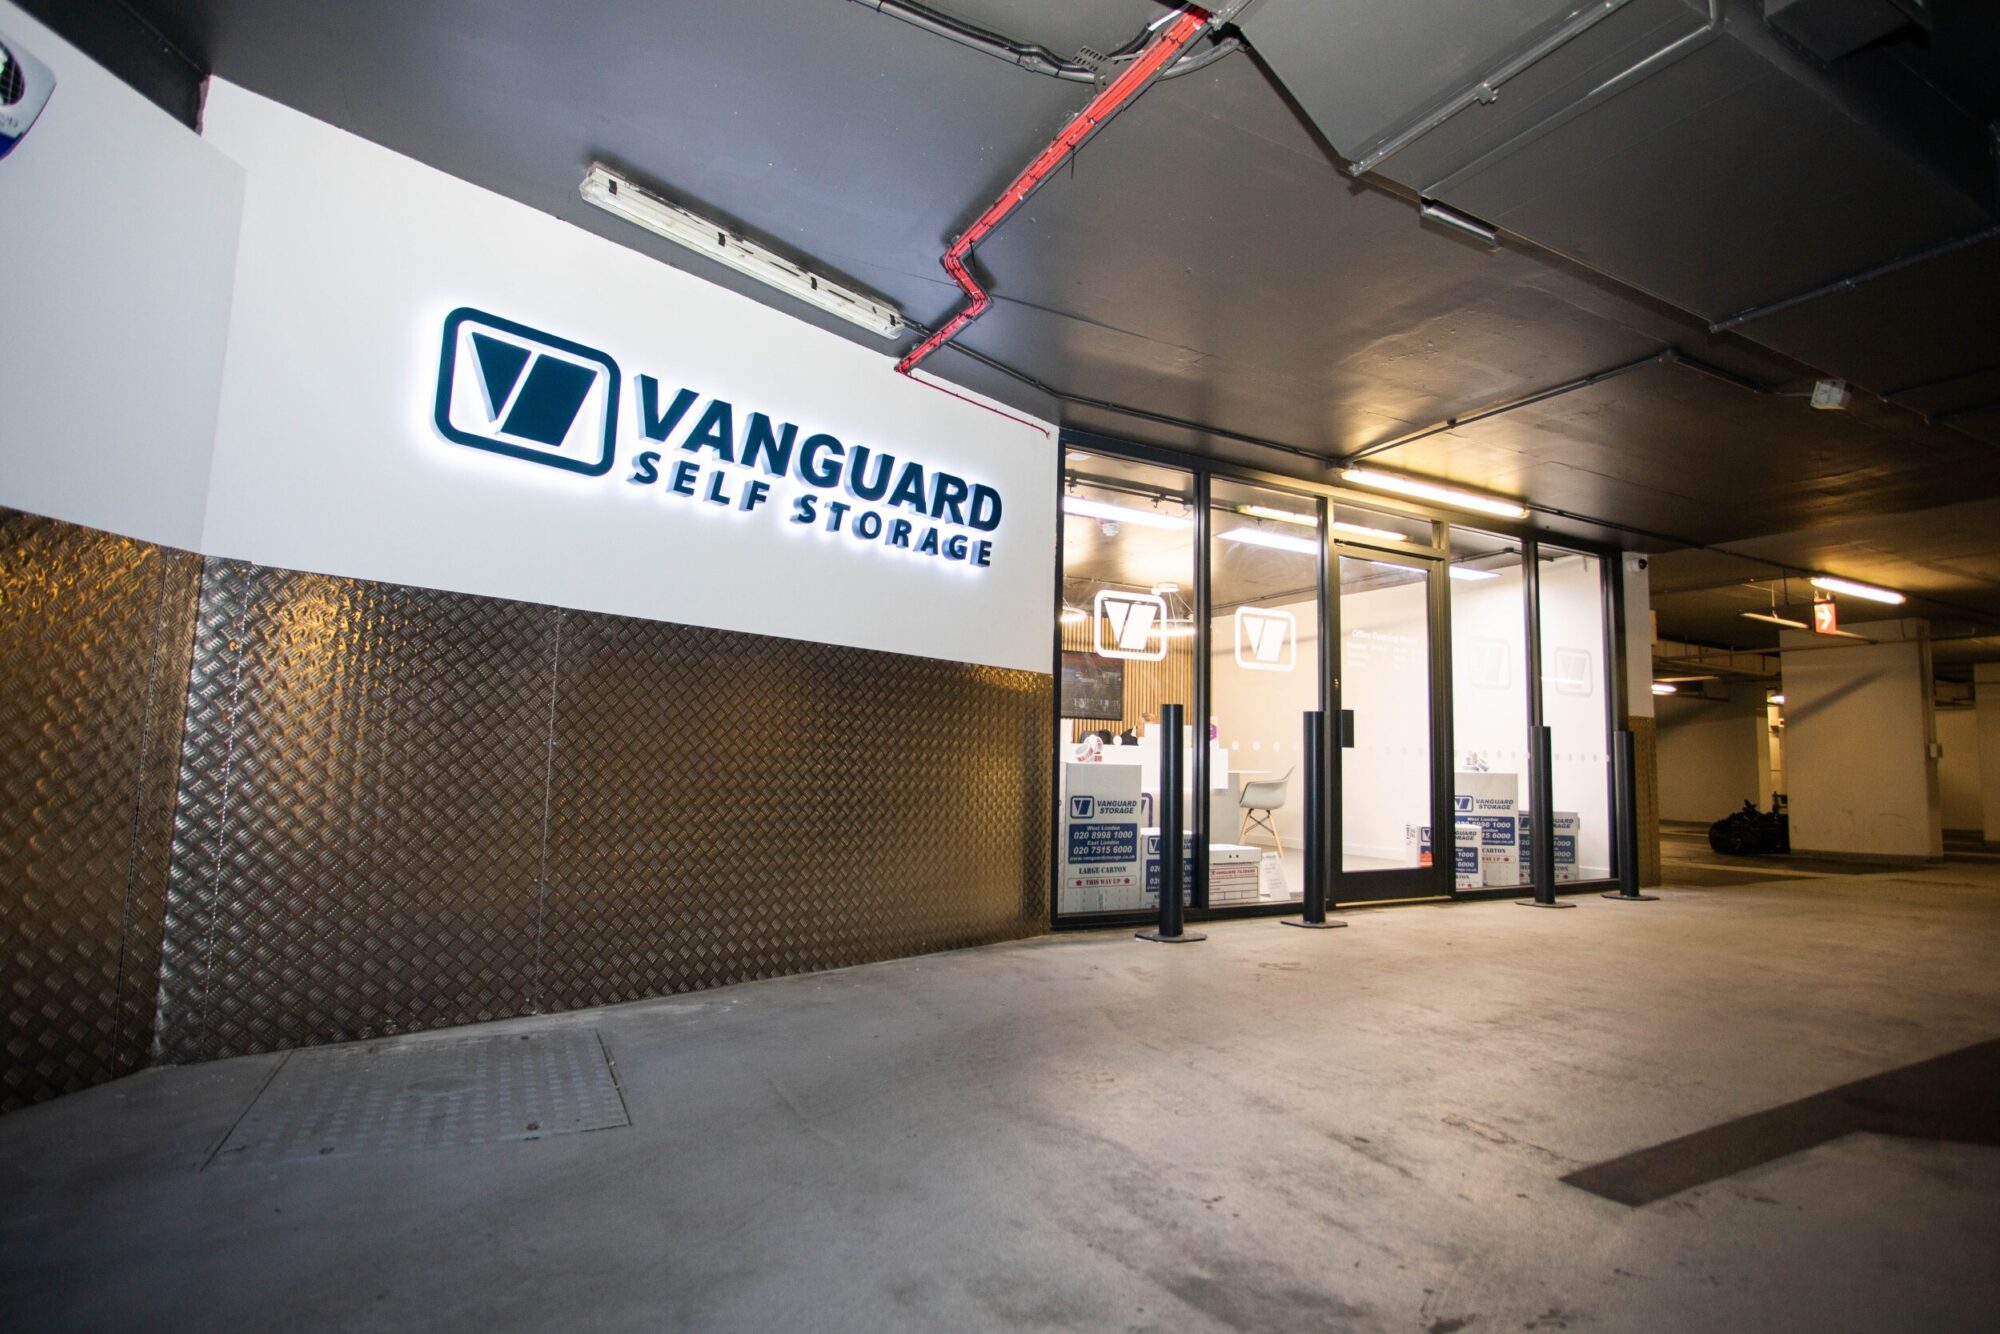 A photo showing the entrance of the Vanguard self storage branch in Soho.